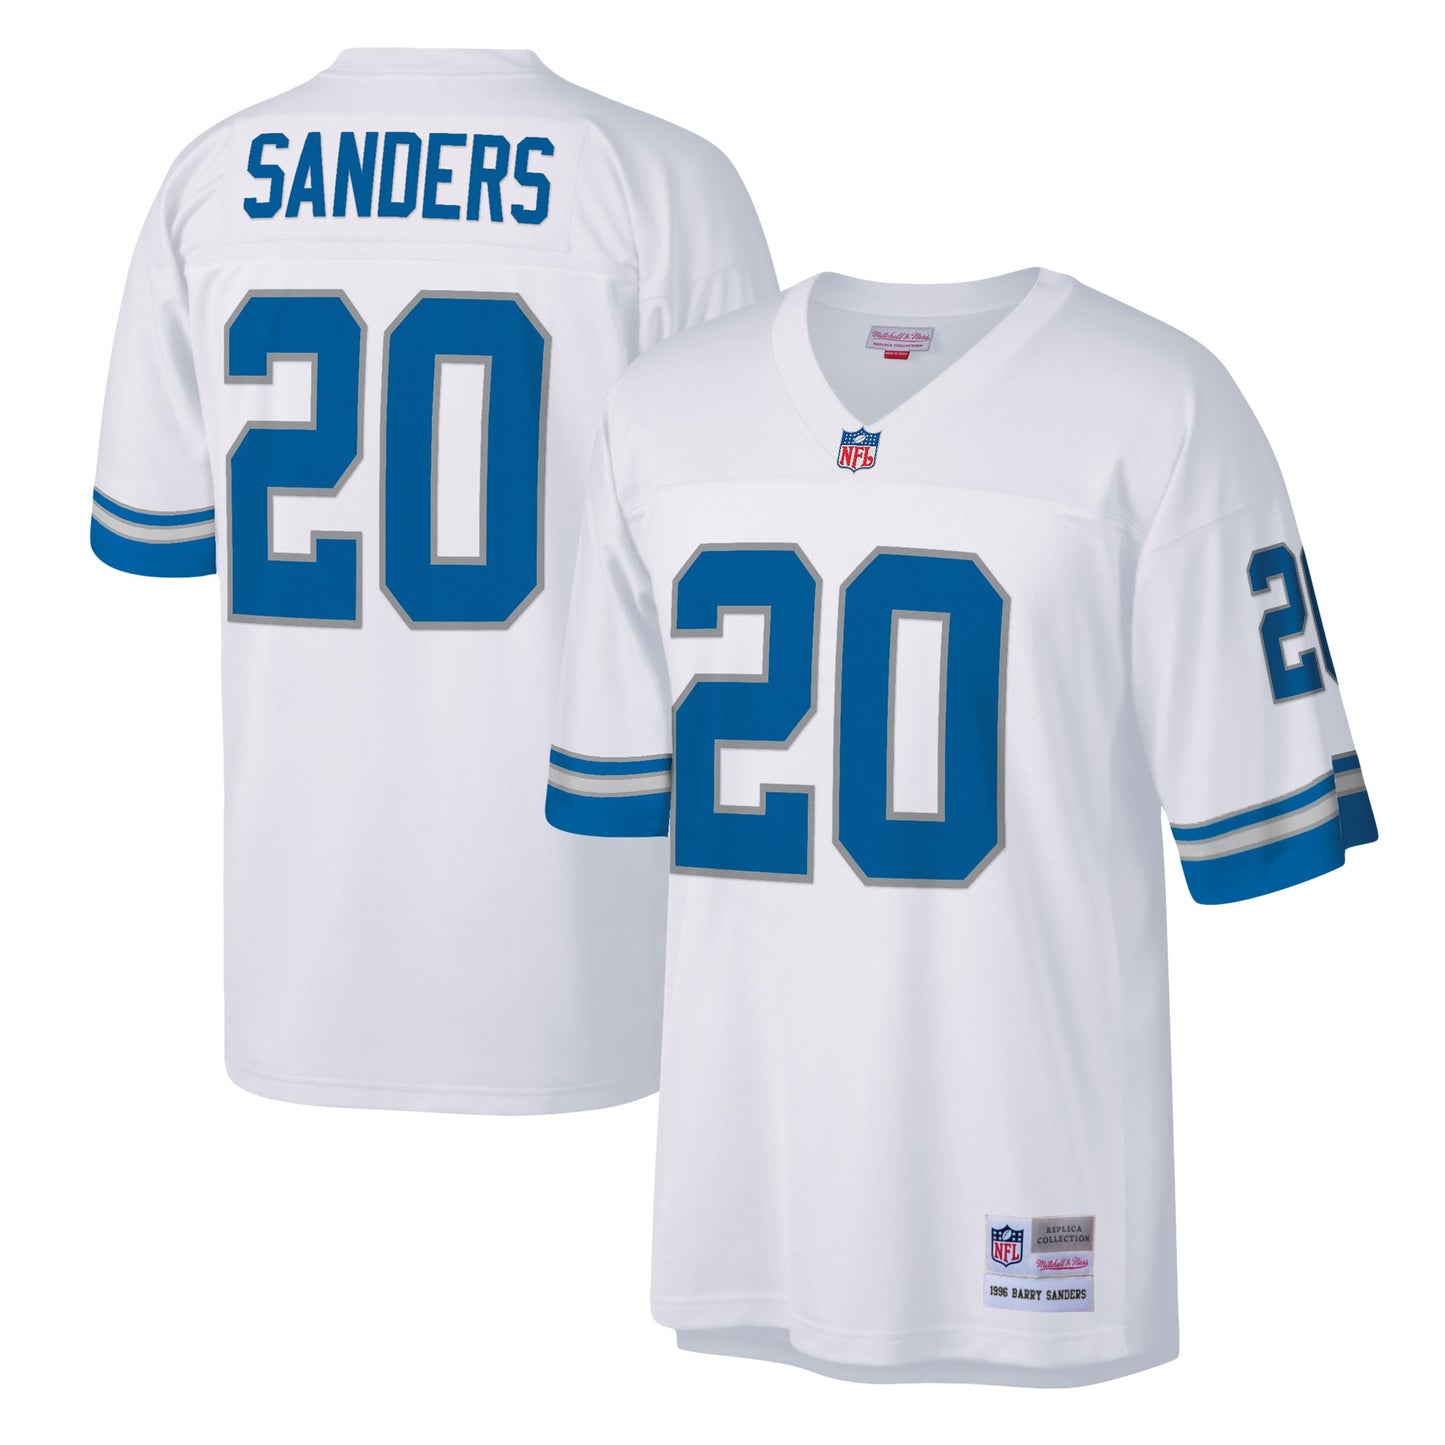 Barry Sanders Detroit Lions Mitchell & Ness Legacy Replica Jersey - White